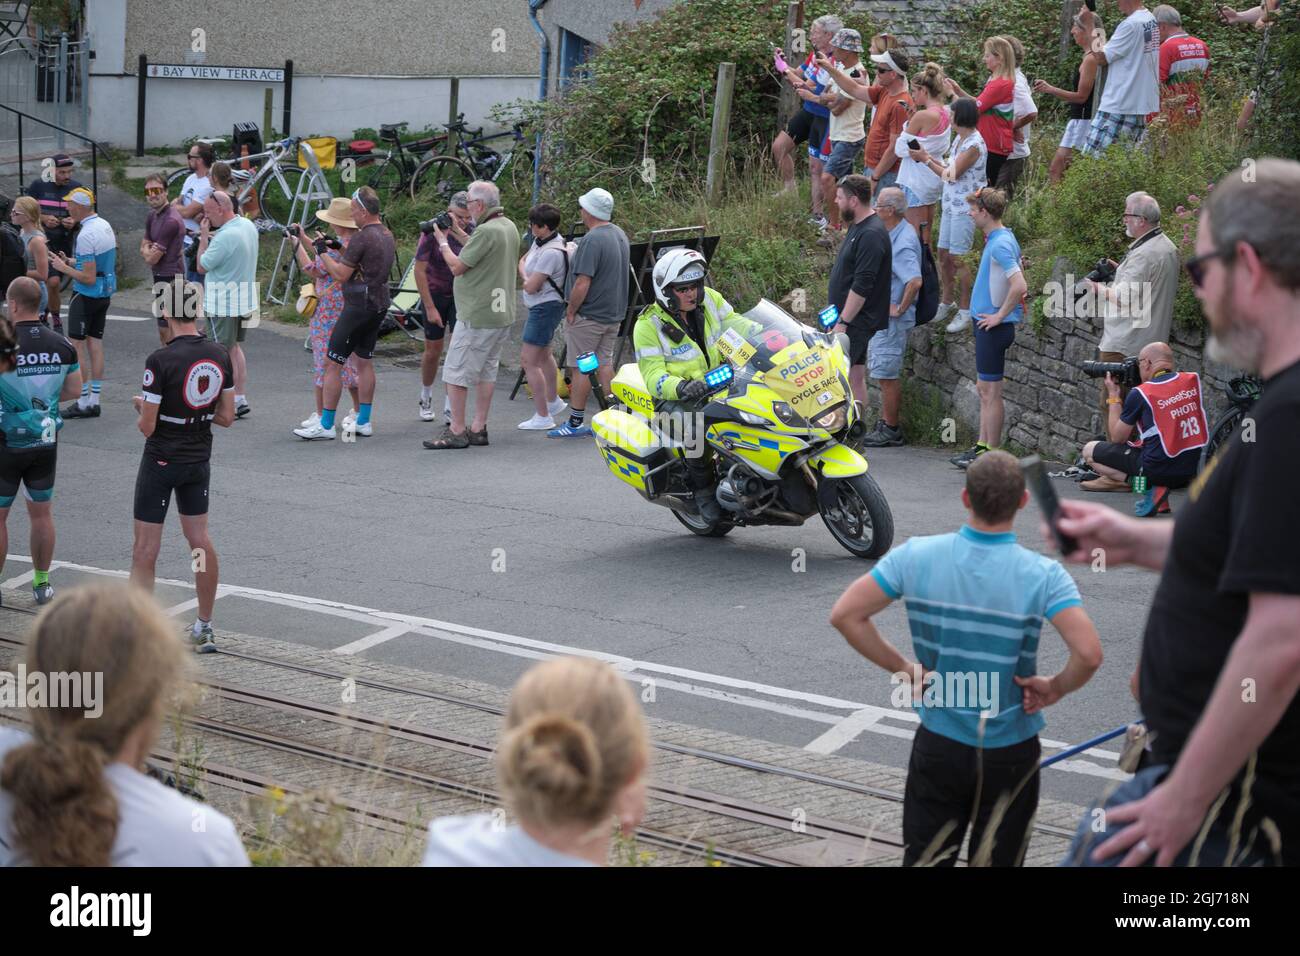 Police escort precedes the riders arrival on the Great Orme, Llandudno for the finish of the Tour of Britain 2021 Stage 4 Stock Photo